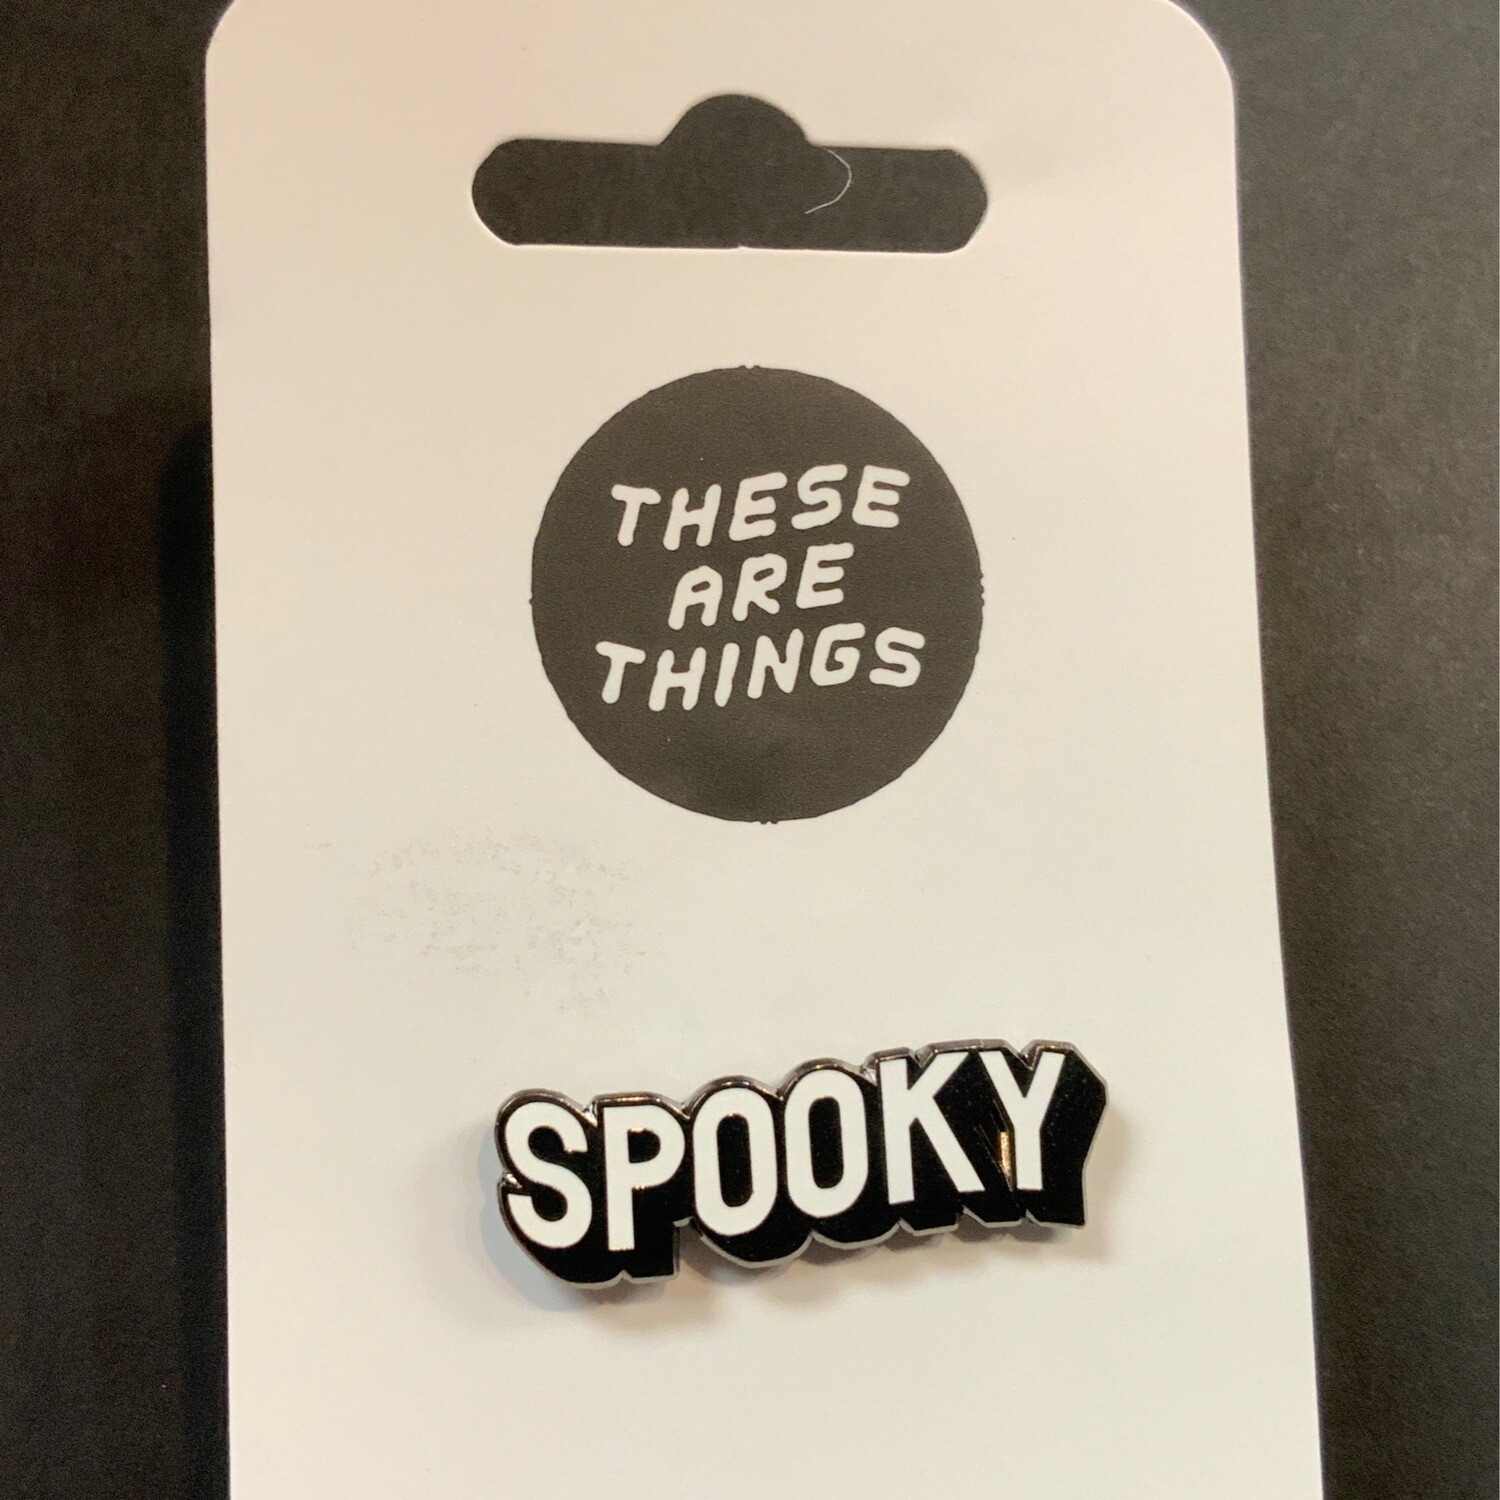 Spooky - Enamel Pin from These Are Things